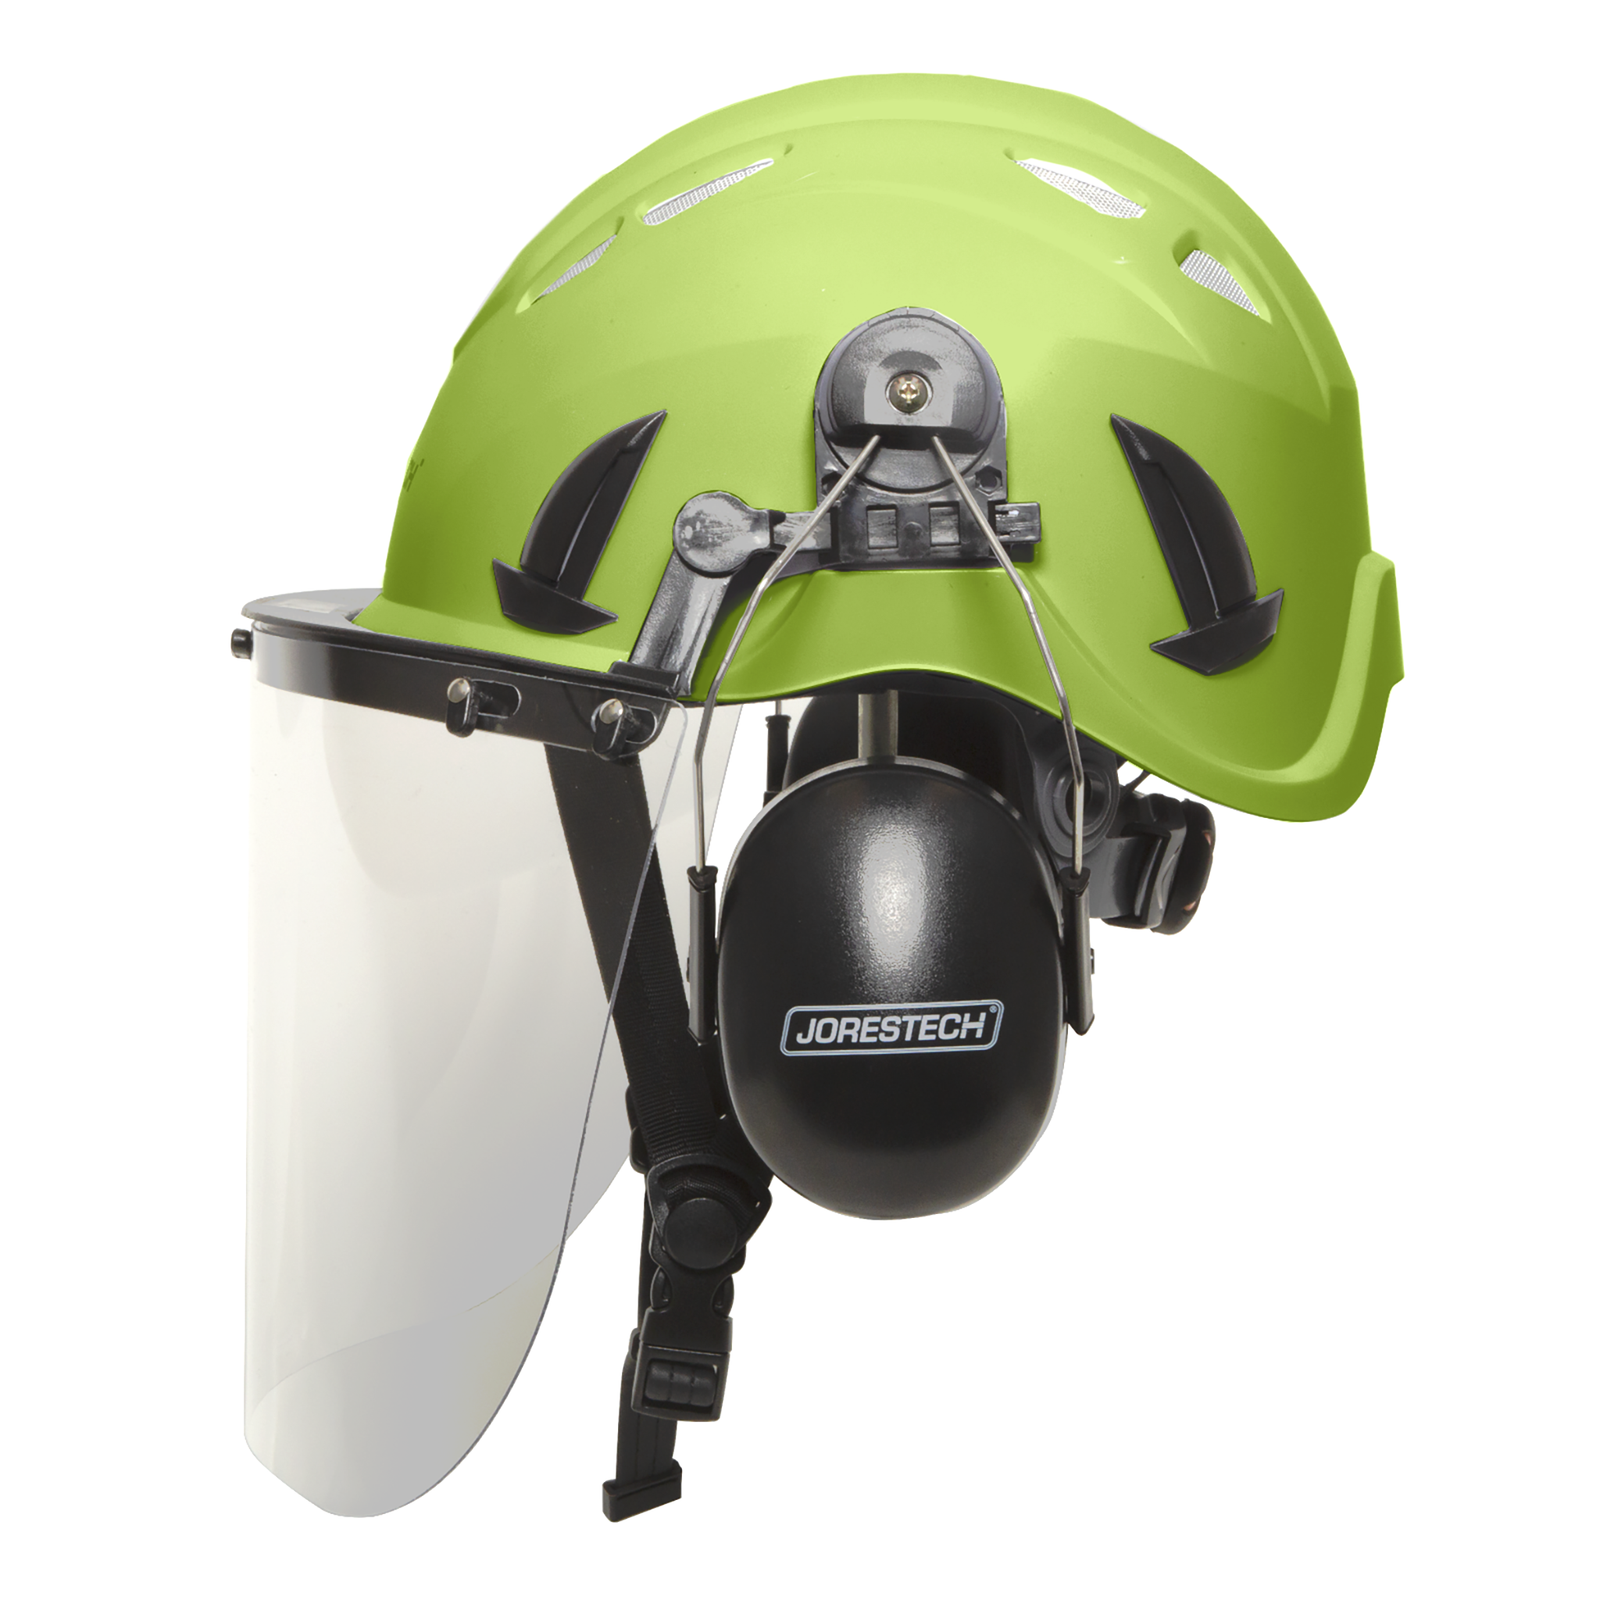 Side view of a lime/green ventilated safety climbing JORESTECH helmet system with clear plastic face shield and black ear muffs included